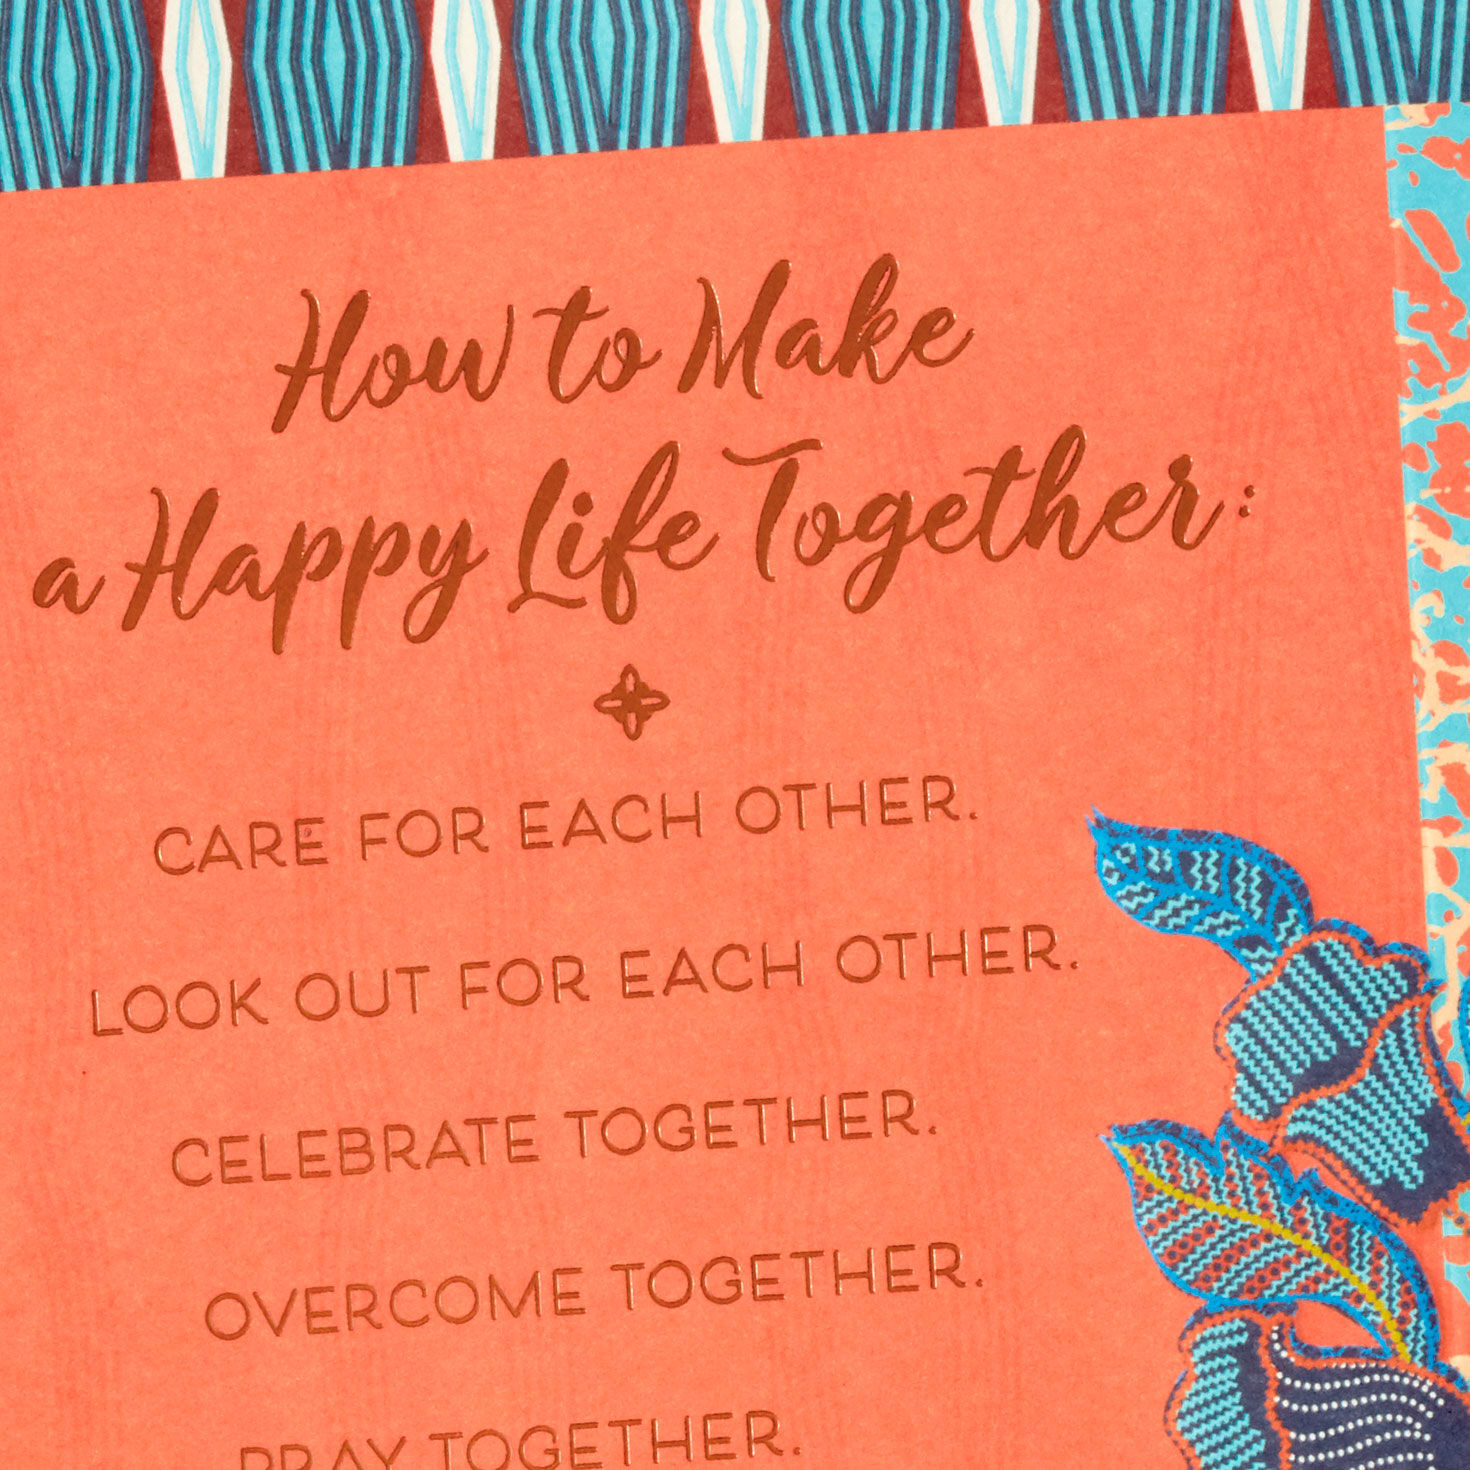 You Two Have Made a Happy Life Together Anniversary Card for only USD 3.99 | Hallmark